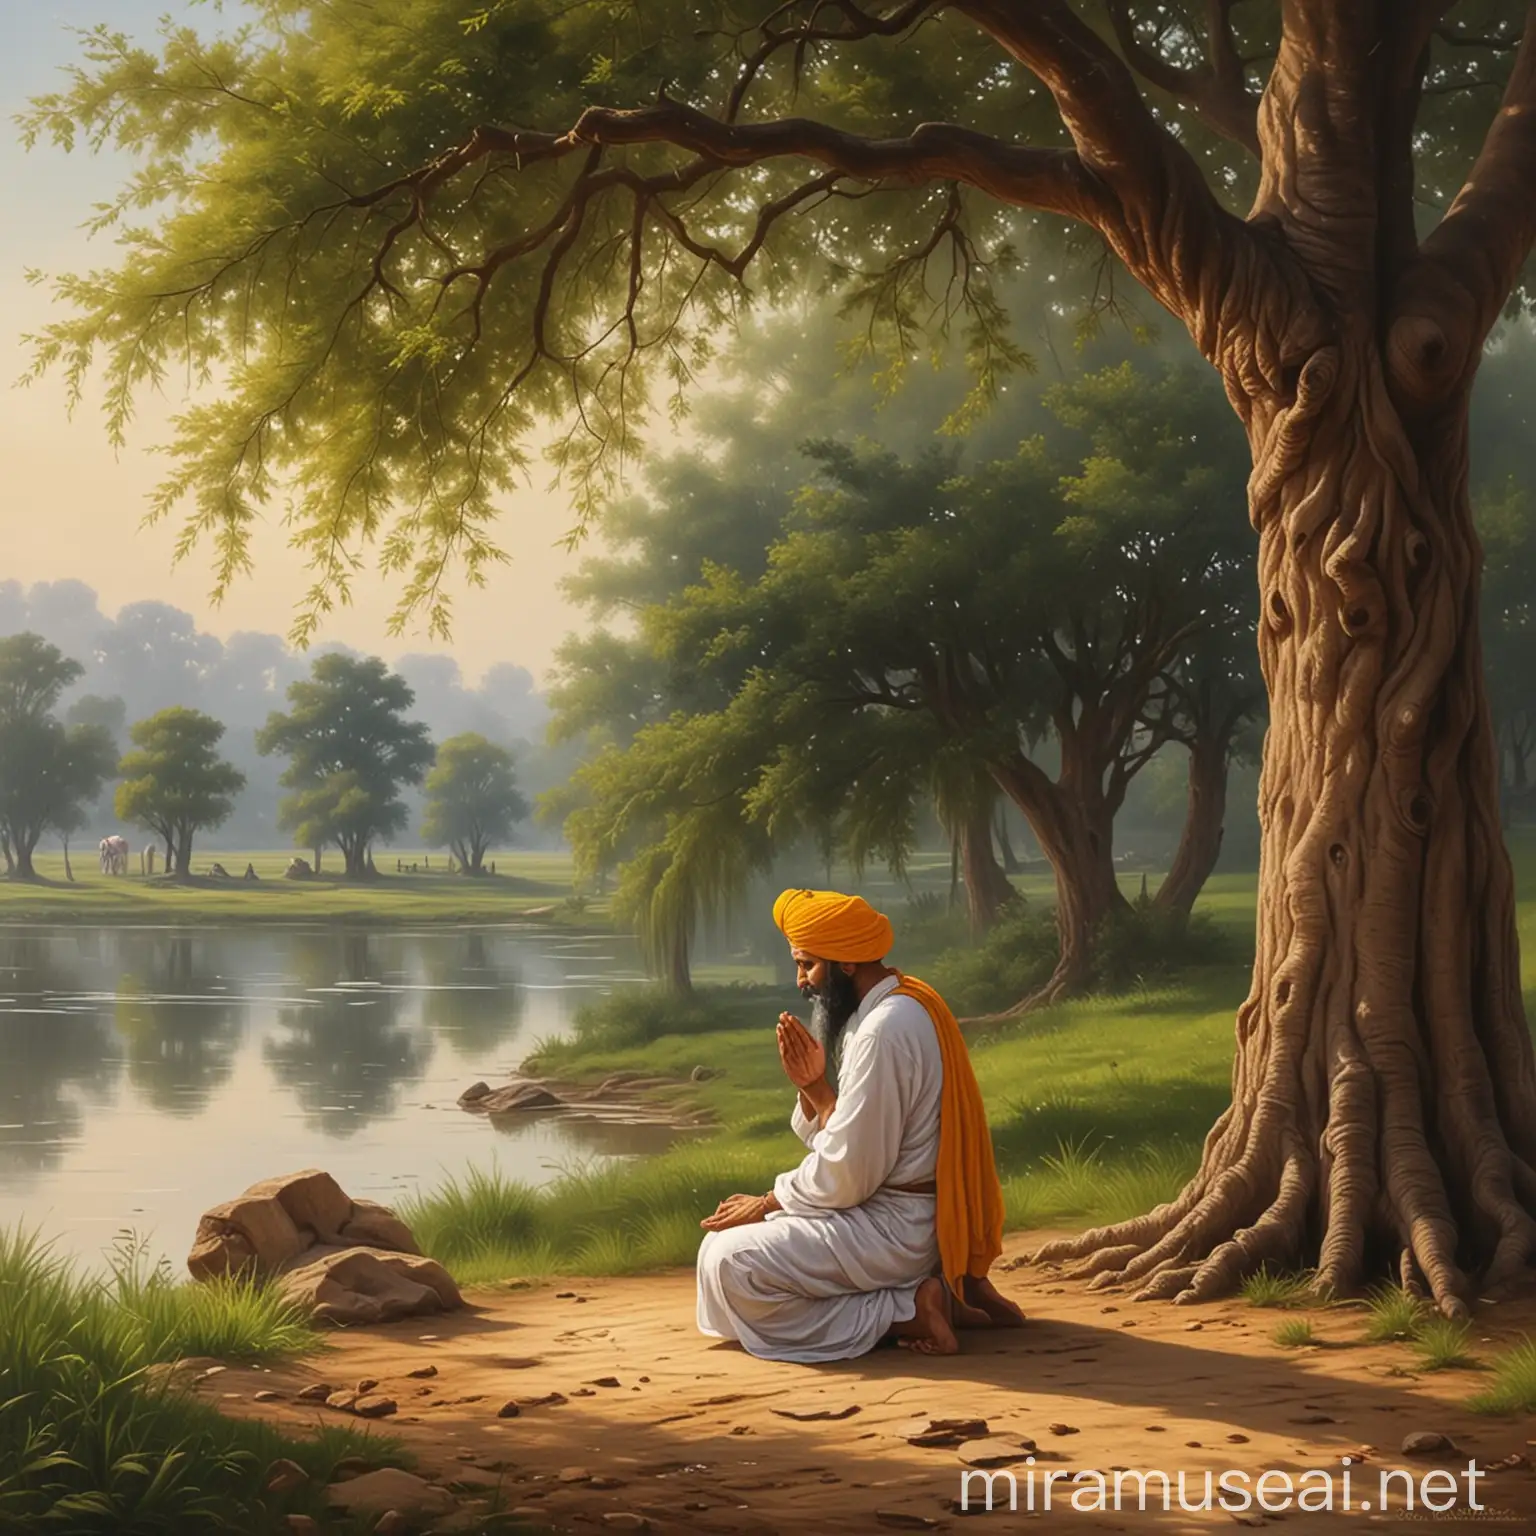 Serene Sikh Man Praying Under a Tree Oil Painting of a Peaceful Scene